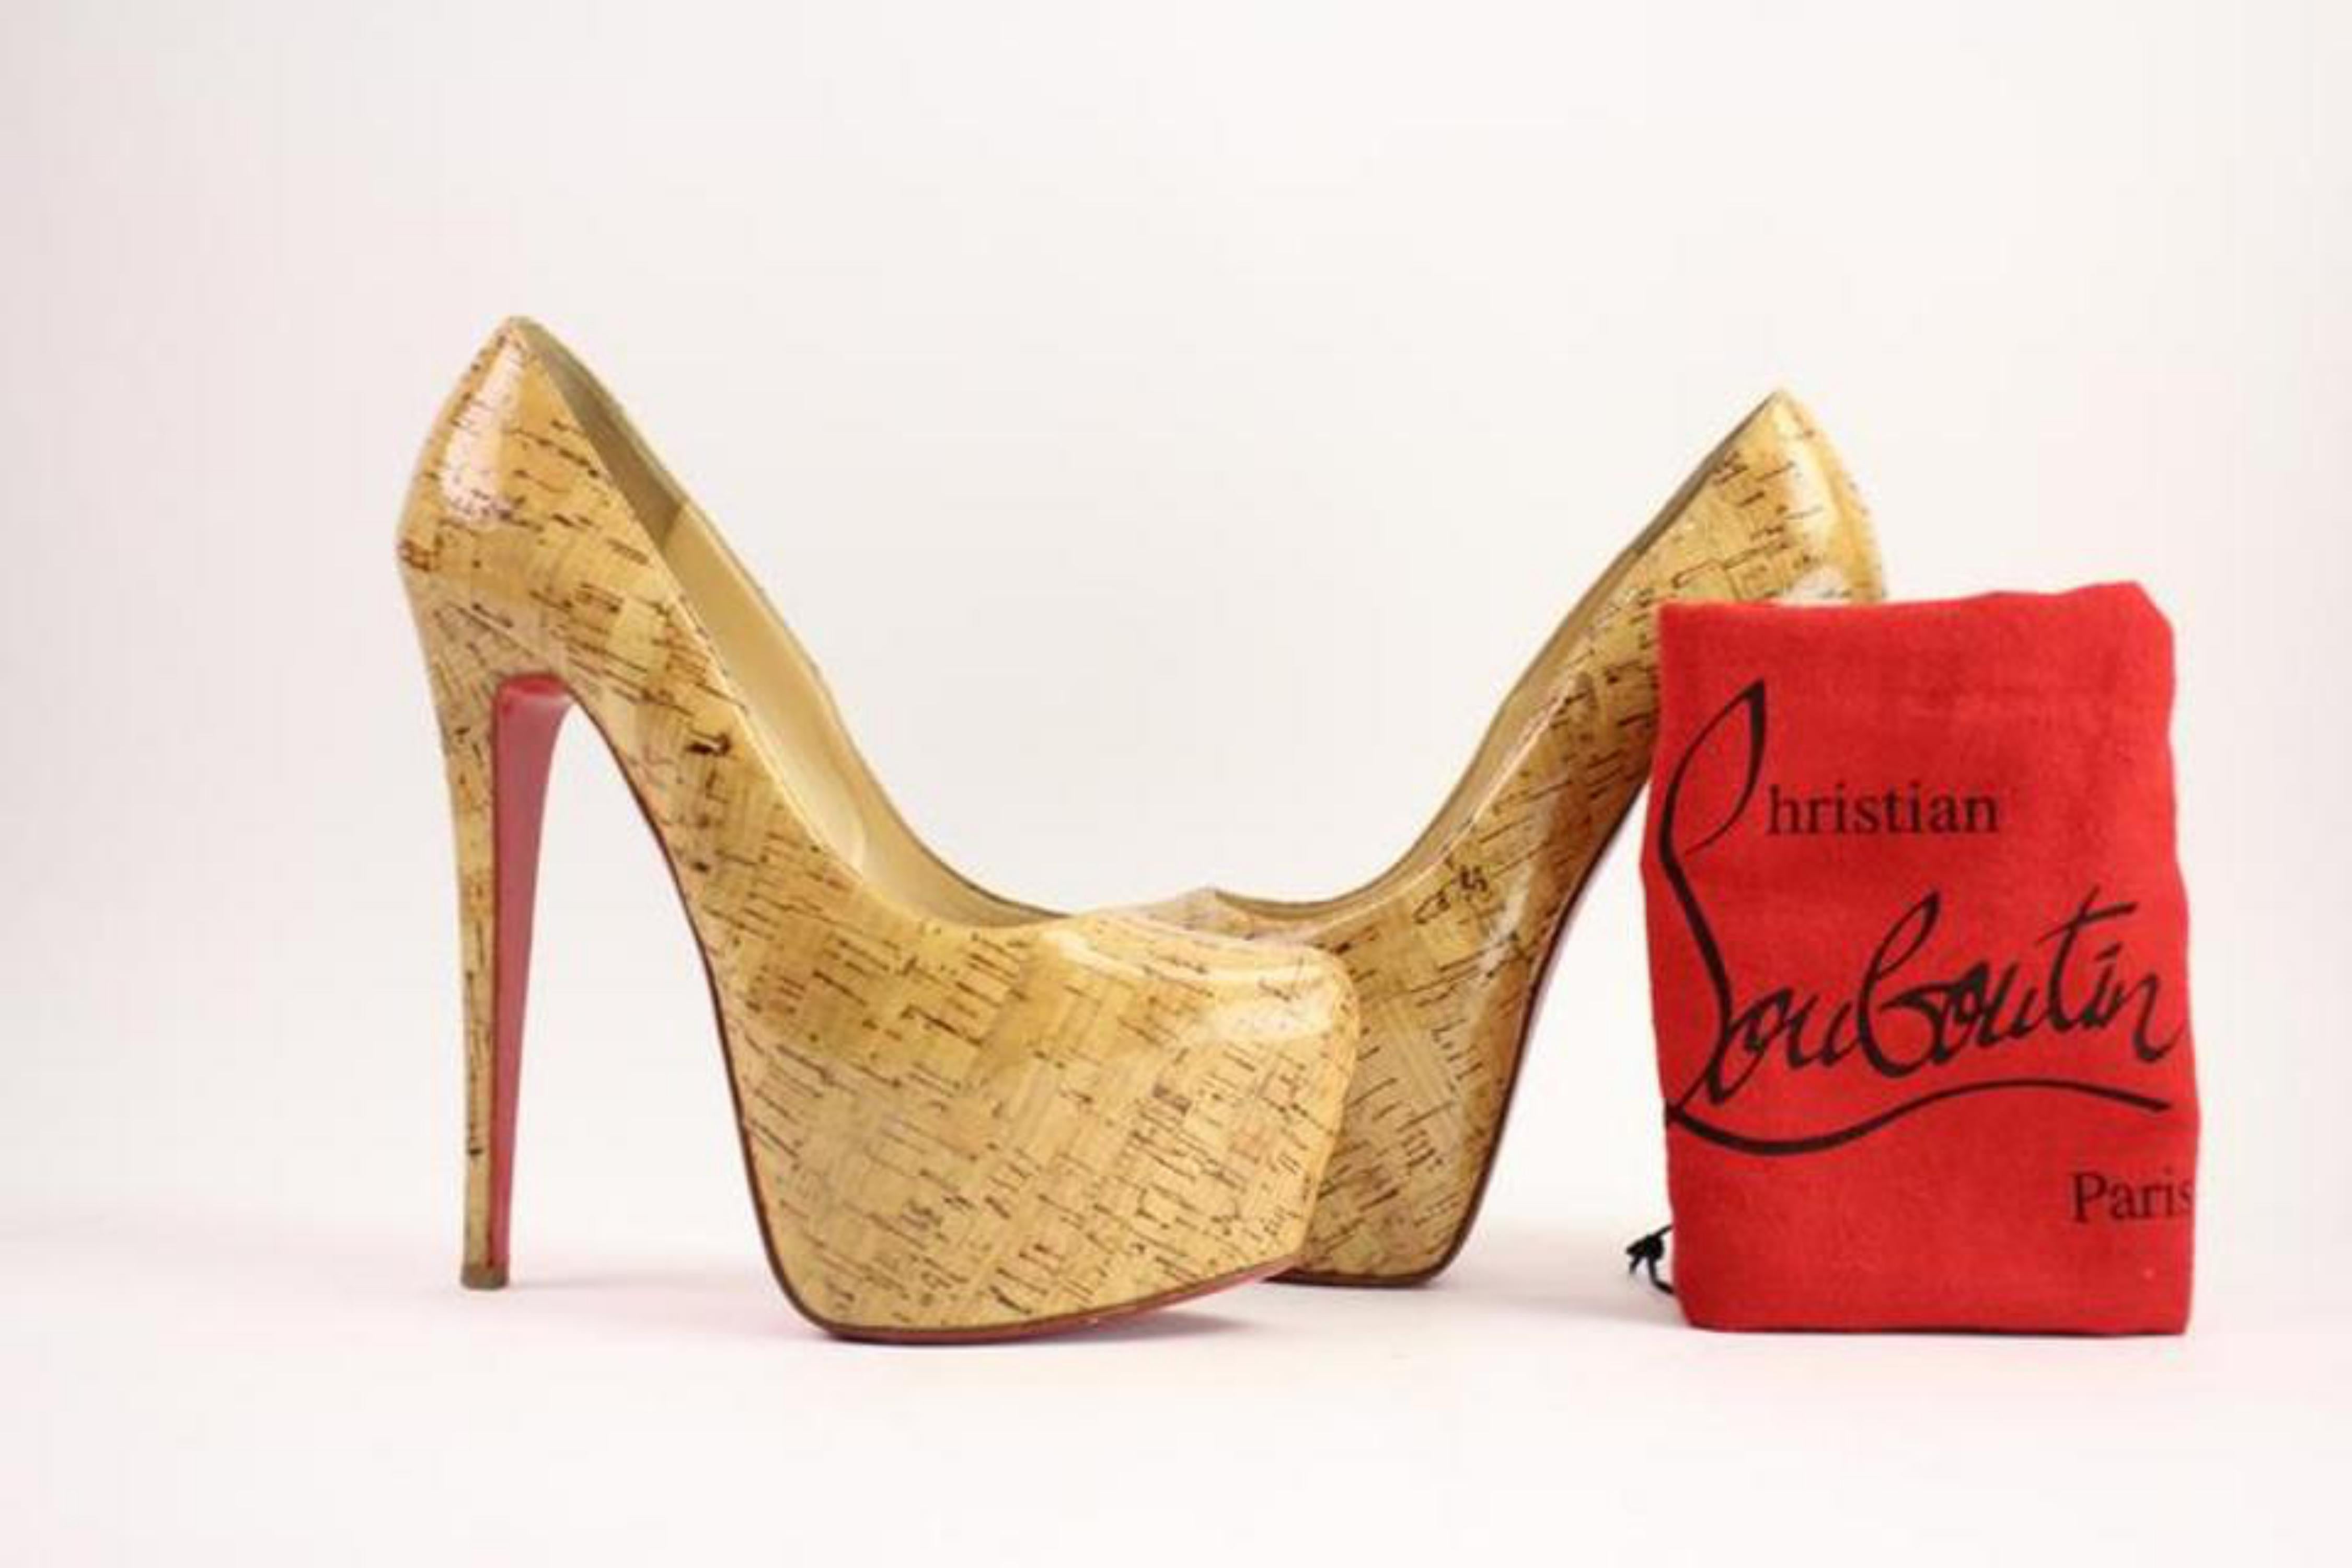 This item will ship immediately!!
Previously owned.
Made In: Italy
Size: 38 1/2
Heel height: 6.3